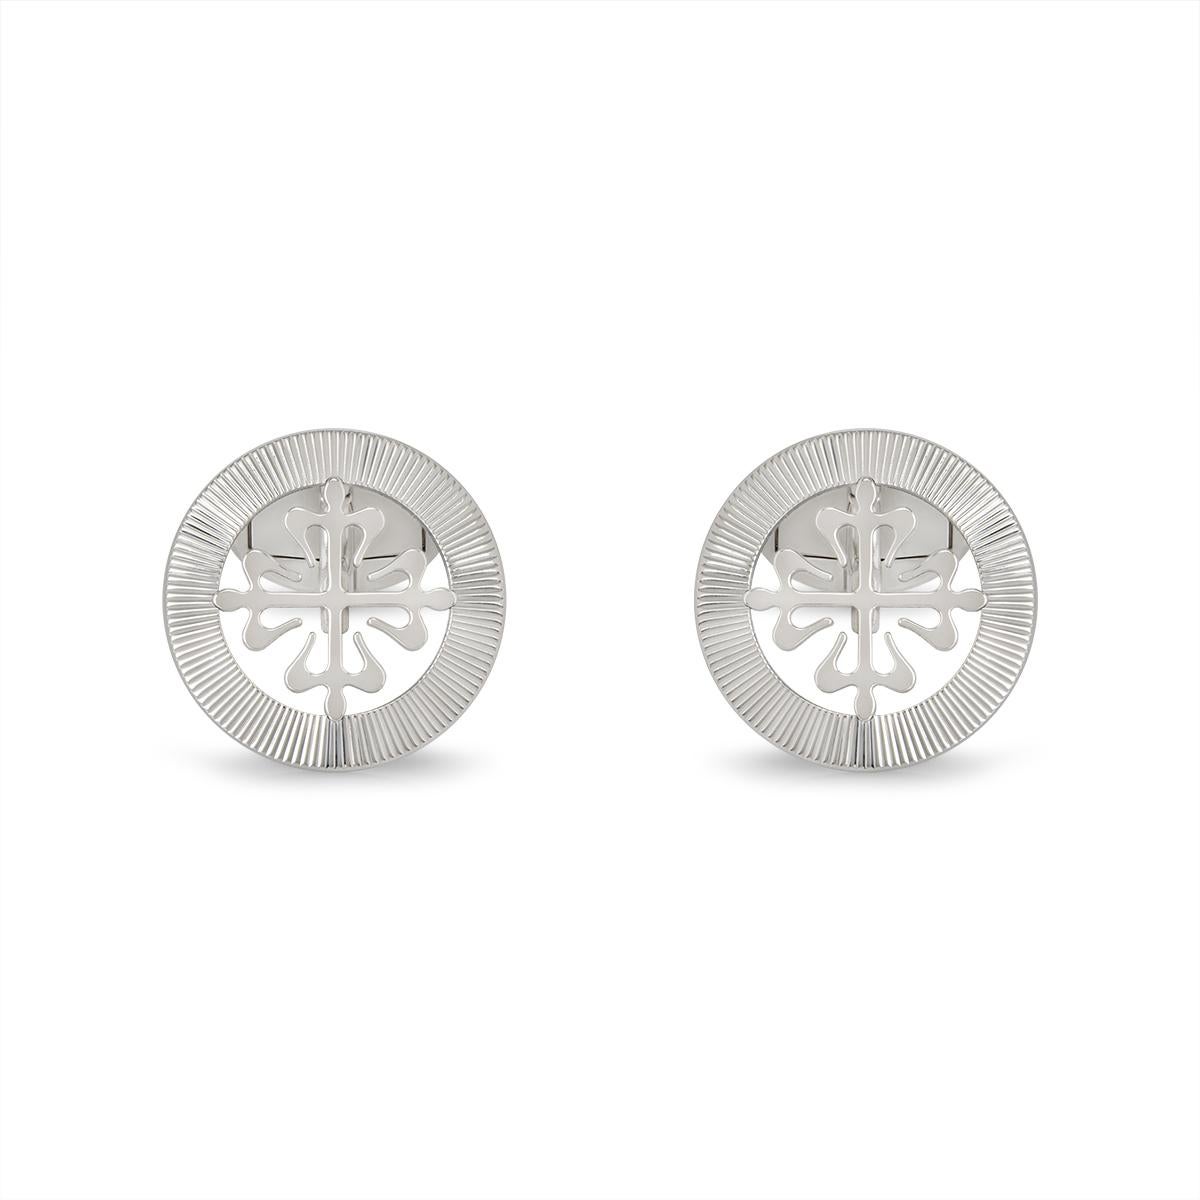 A pair of 18k white gold Calatrava cufflinks by Patek Philippe. The cufflinks feature the classic Calatrava cross motif, surrounded with a guilloche outer edge boarder. The cufflinks have whale back fittings and the motif measures 18mm in diameter.